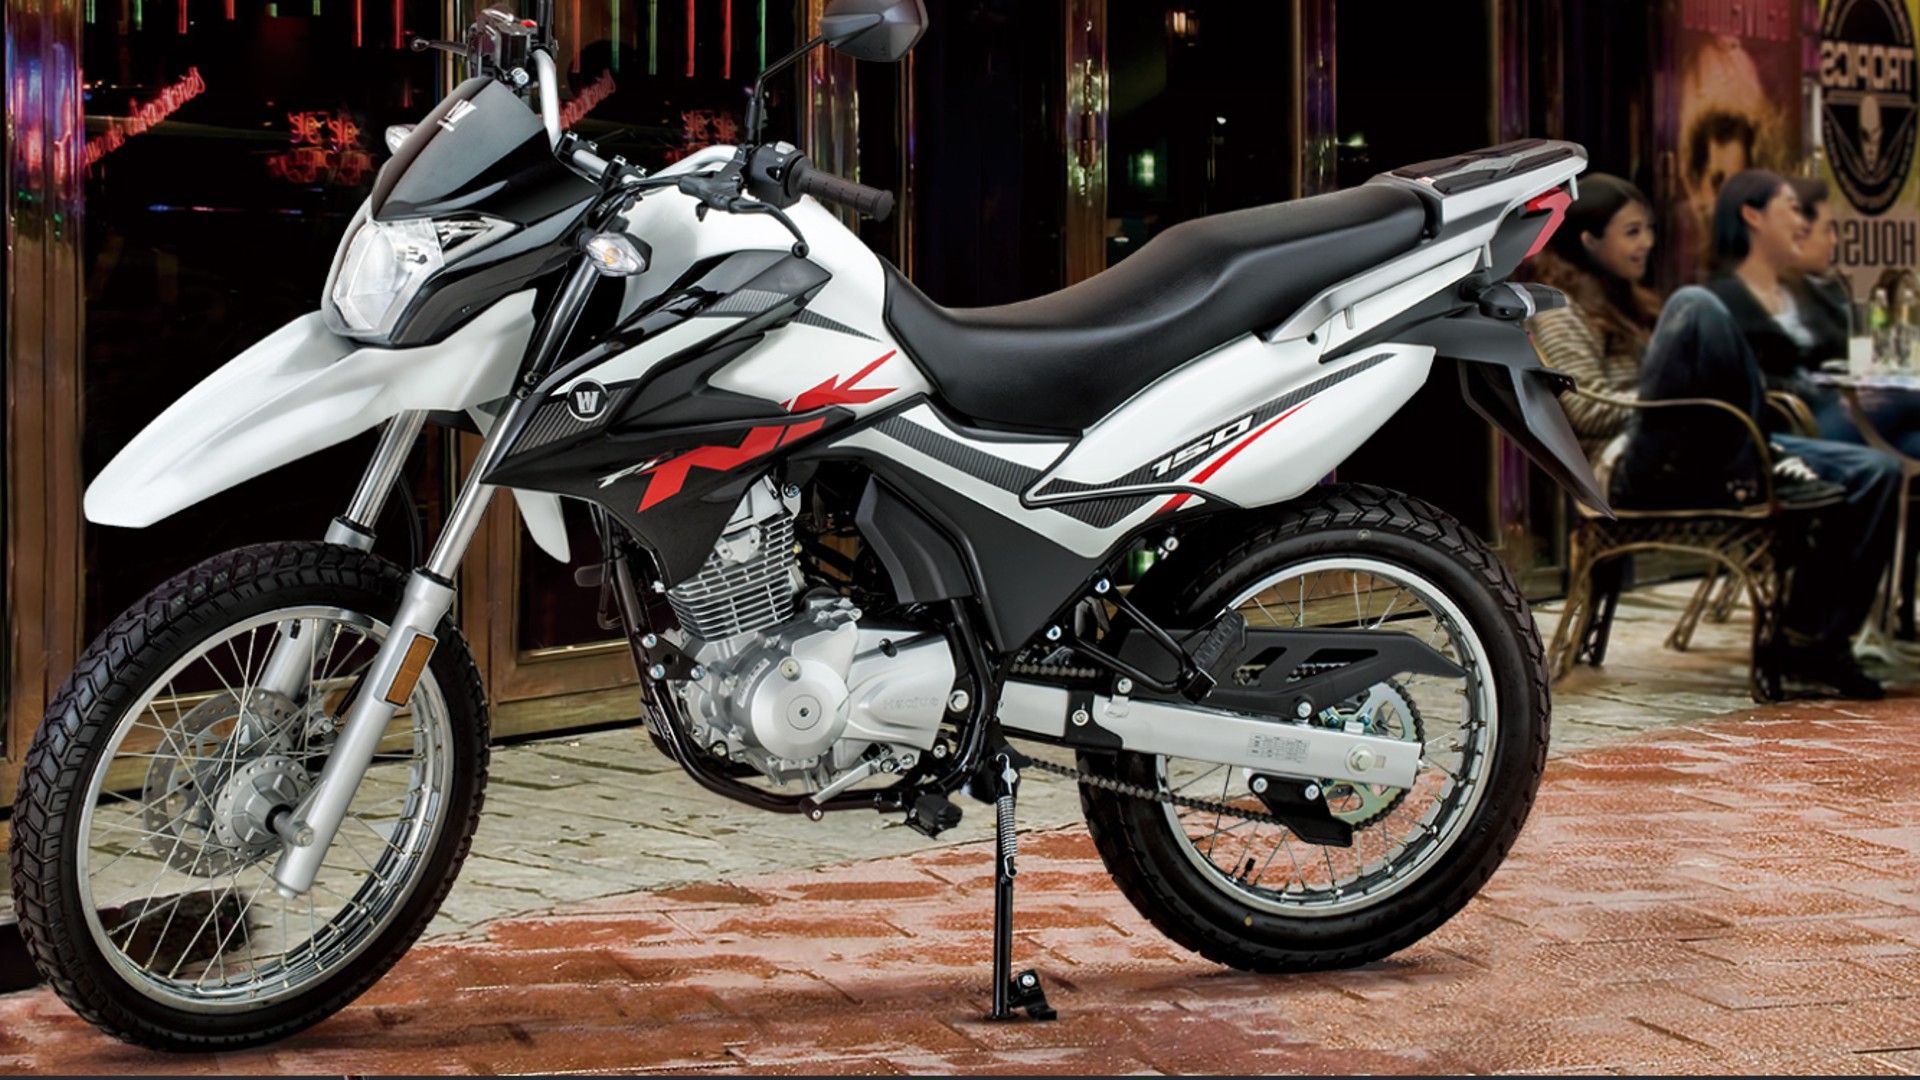 10 cheapest two-cylinder motorcycles on the market